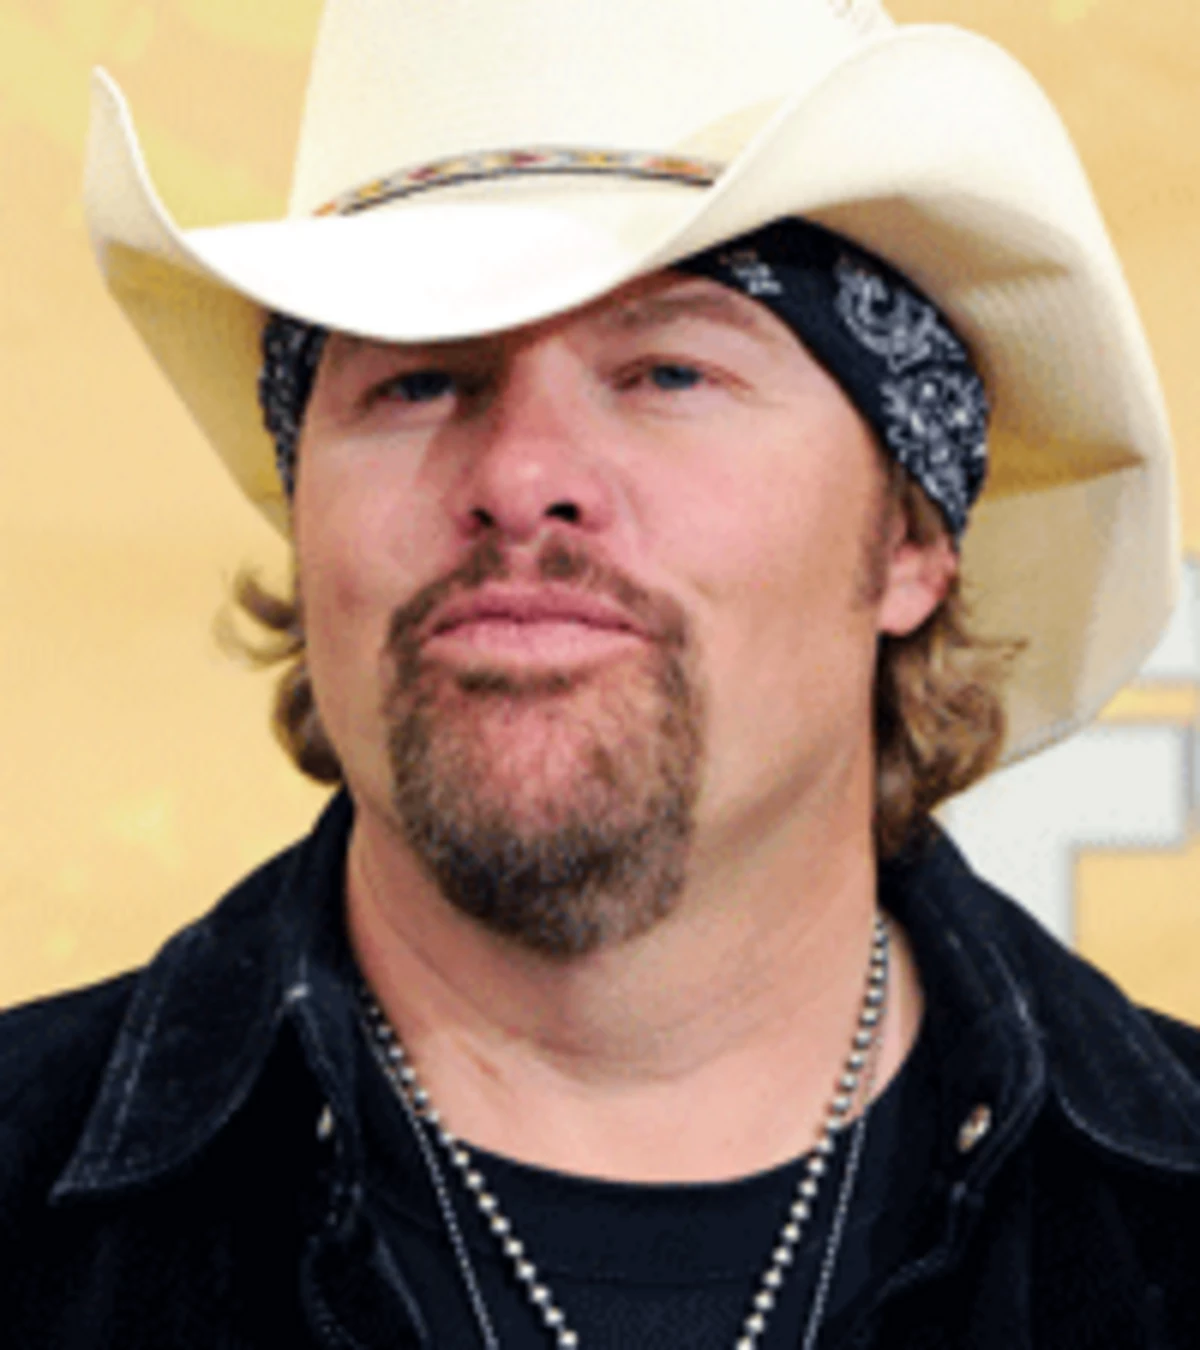 Toby Keith Live in Overdrive Singer Readies FordSponsored Summer Tour